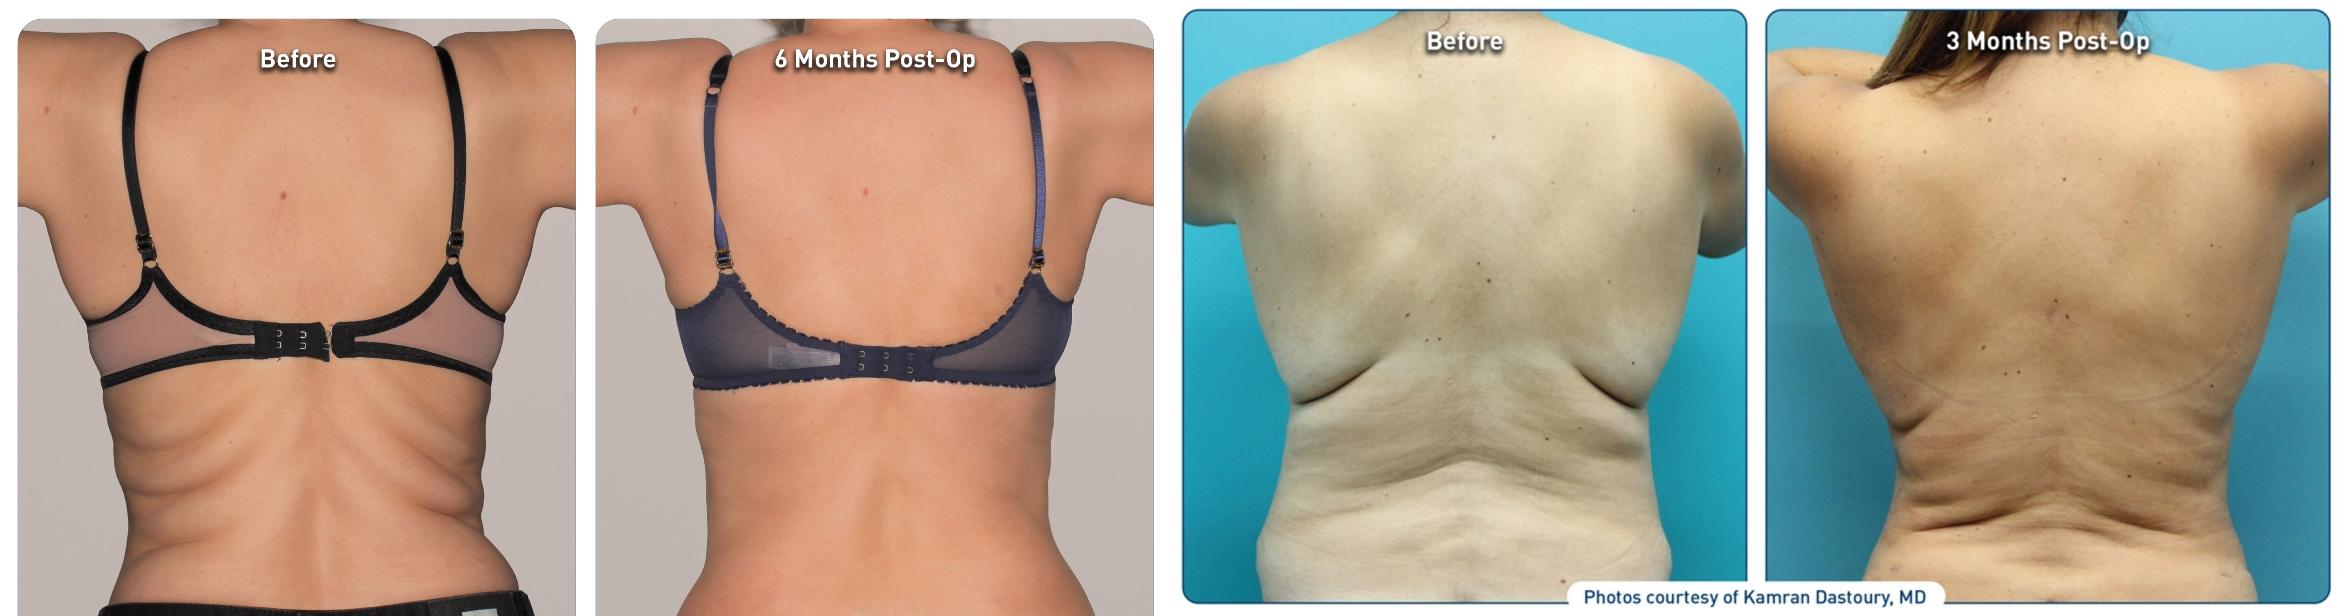 Before & After Renuvion Case 76299 Back View in Orlando, FL